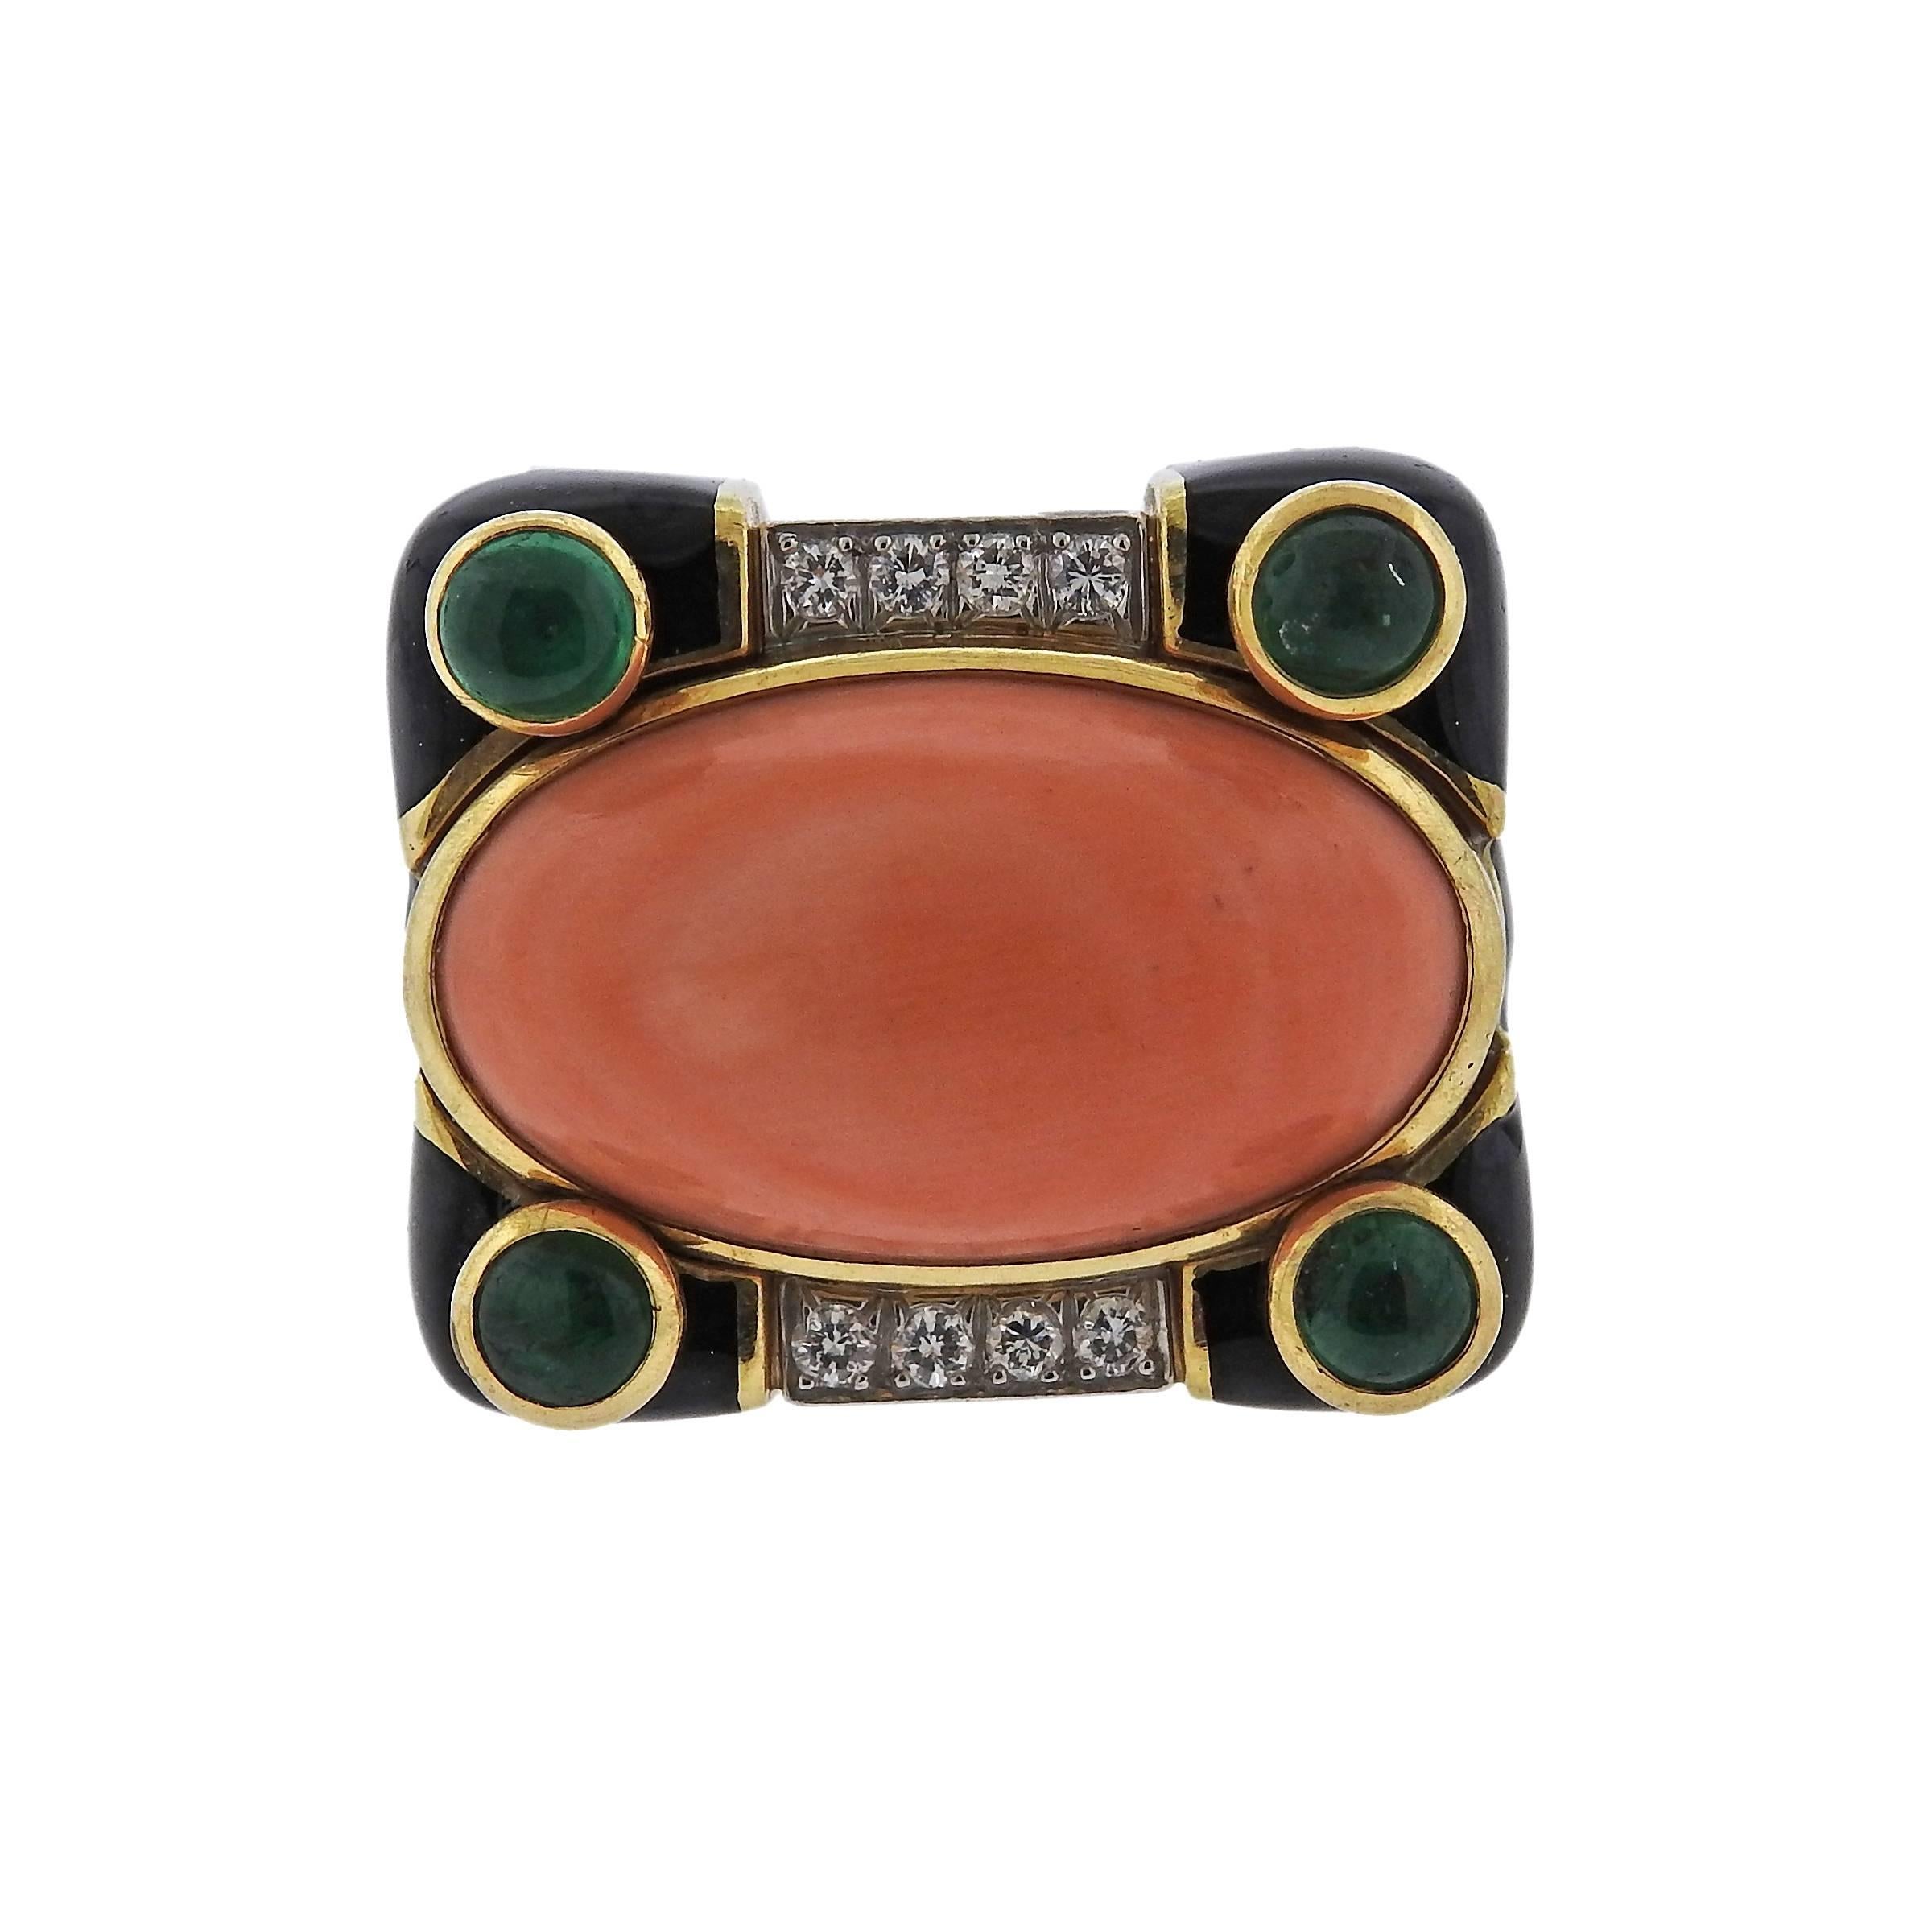 Gorgeous 18k gold platinum enamel ring. Crafted by David Webb and featuring coral, emeralds, and approximately 0.32ctw of H/VS diamonds. Ring is a size 6, ring top is 22mm x 25mm. Marked Webb, plat 18k. Weight is 32.3 grams. 